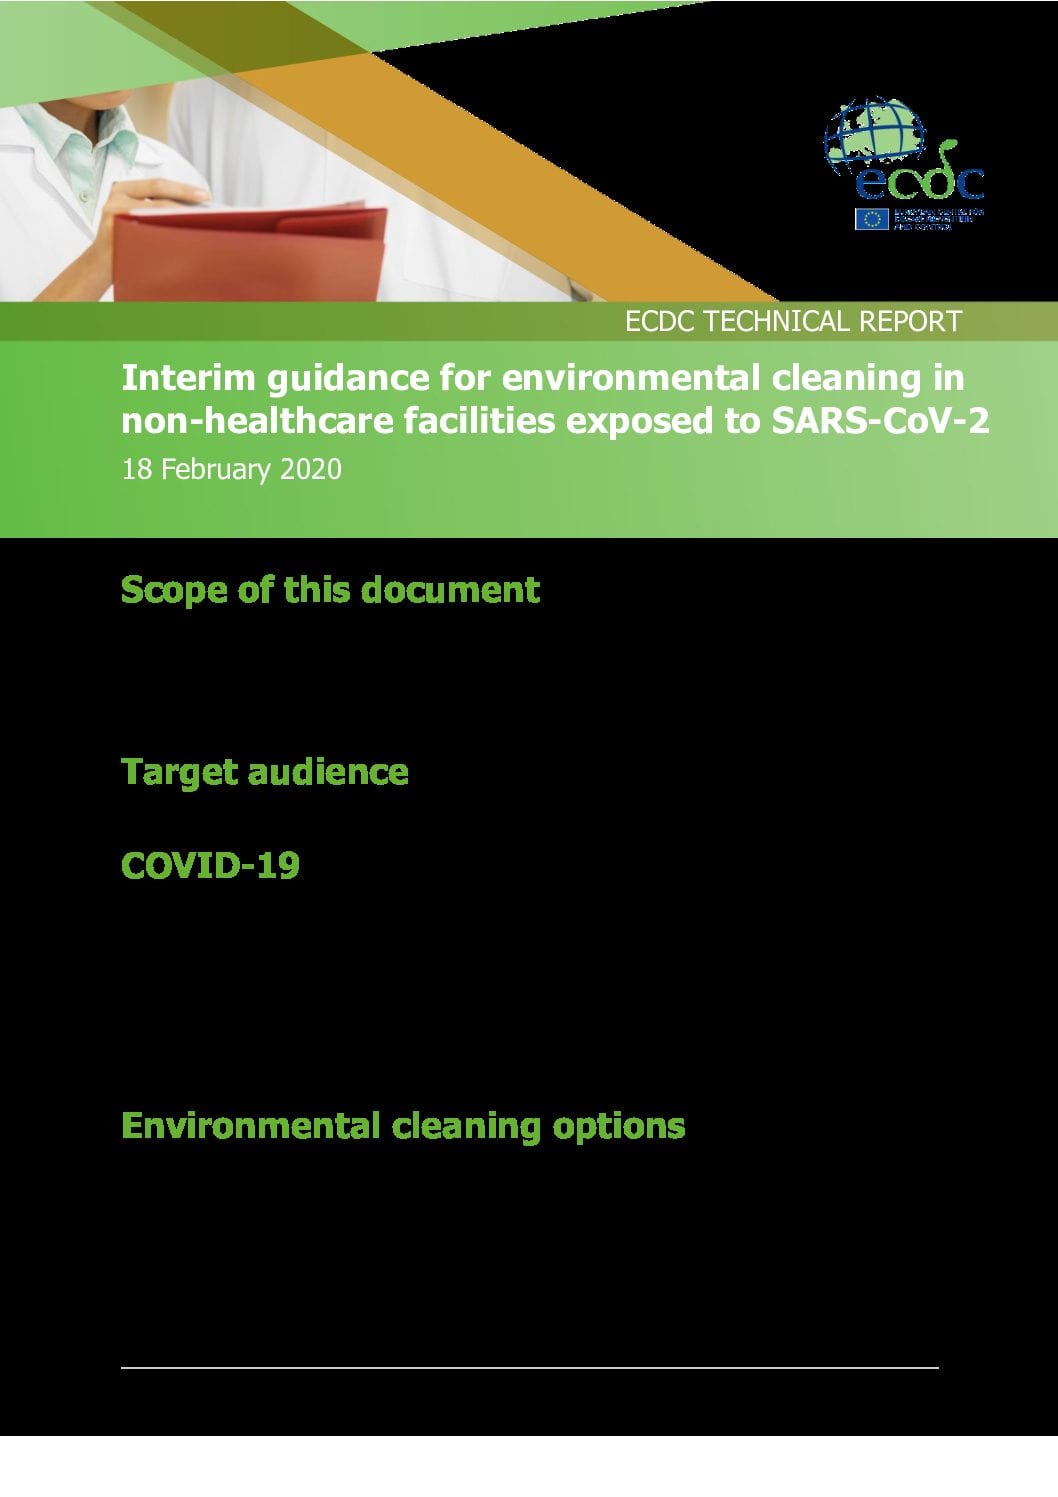 Interim guidance for environmental cleaning in non-healthcare facilities exposed to SARS-CoV-2